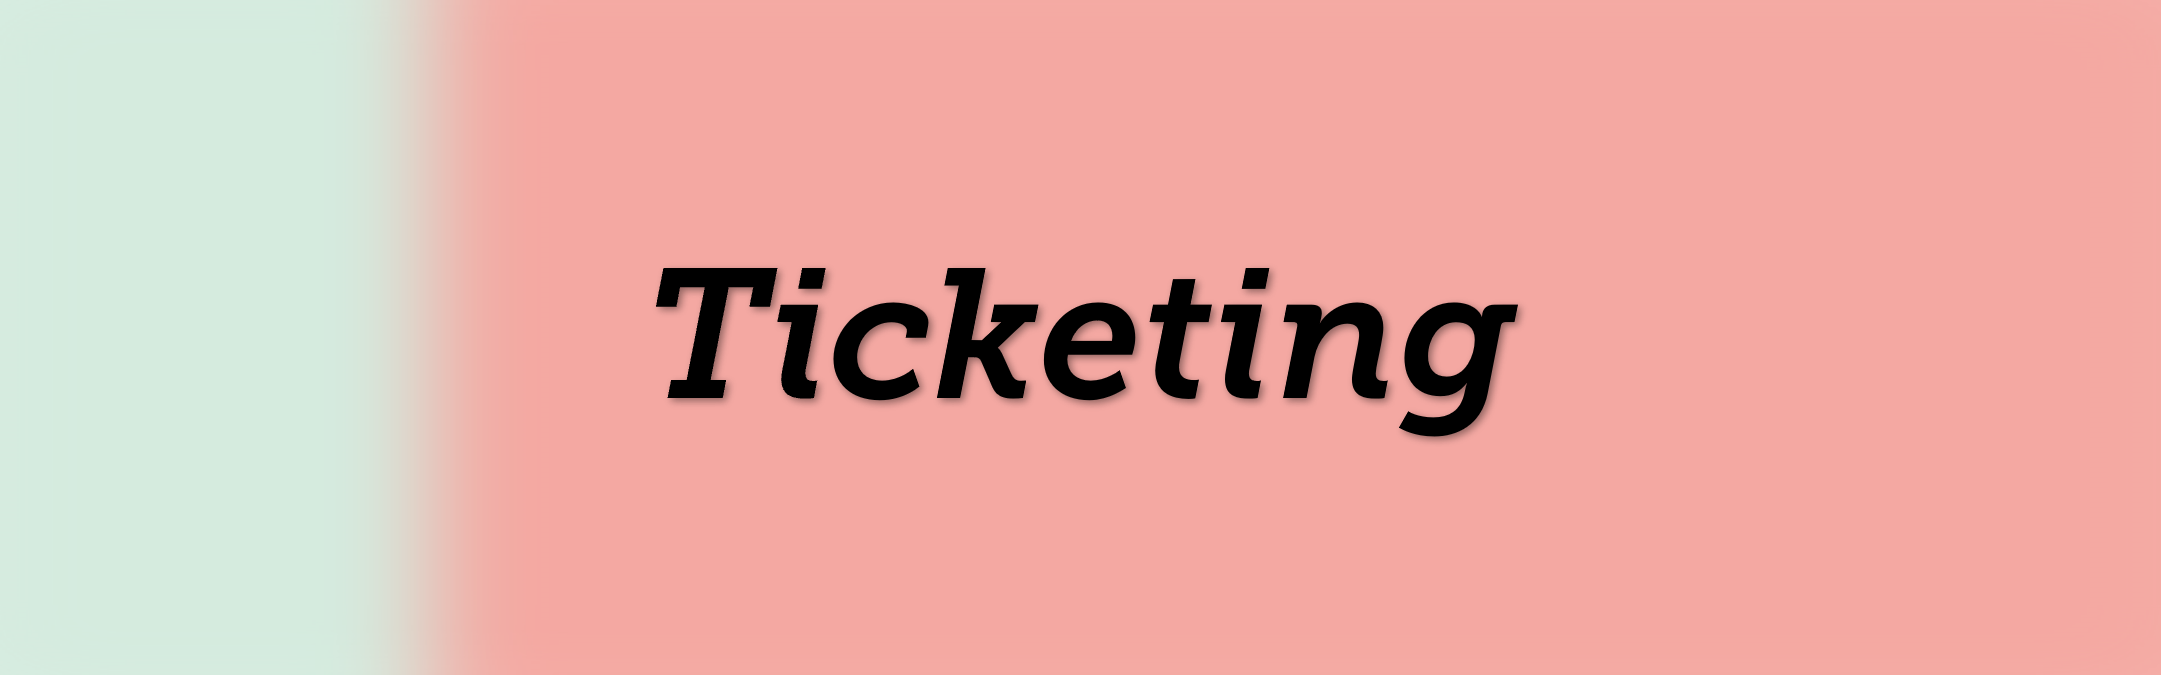 Ticketing FR.png